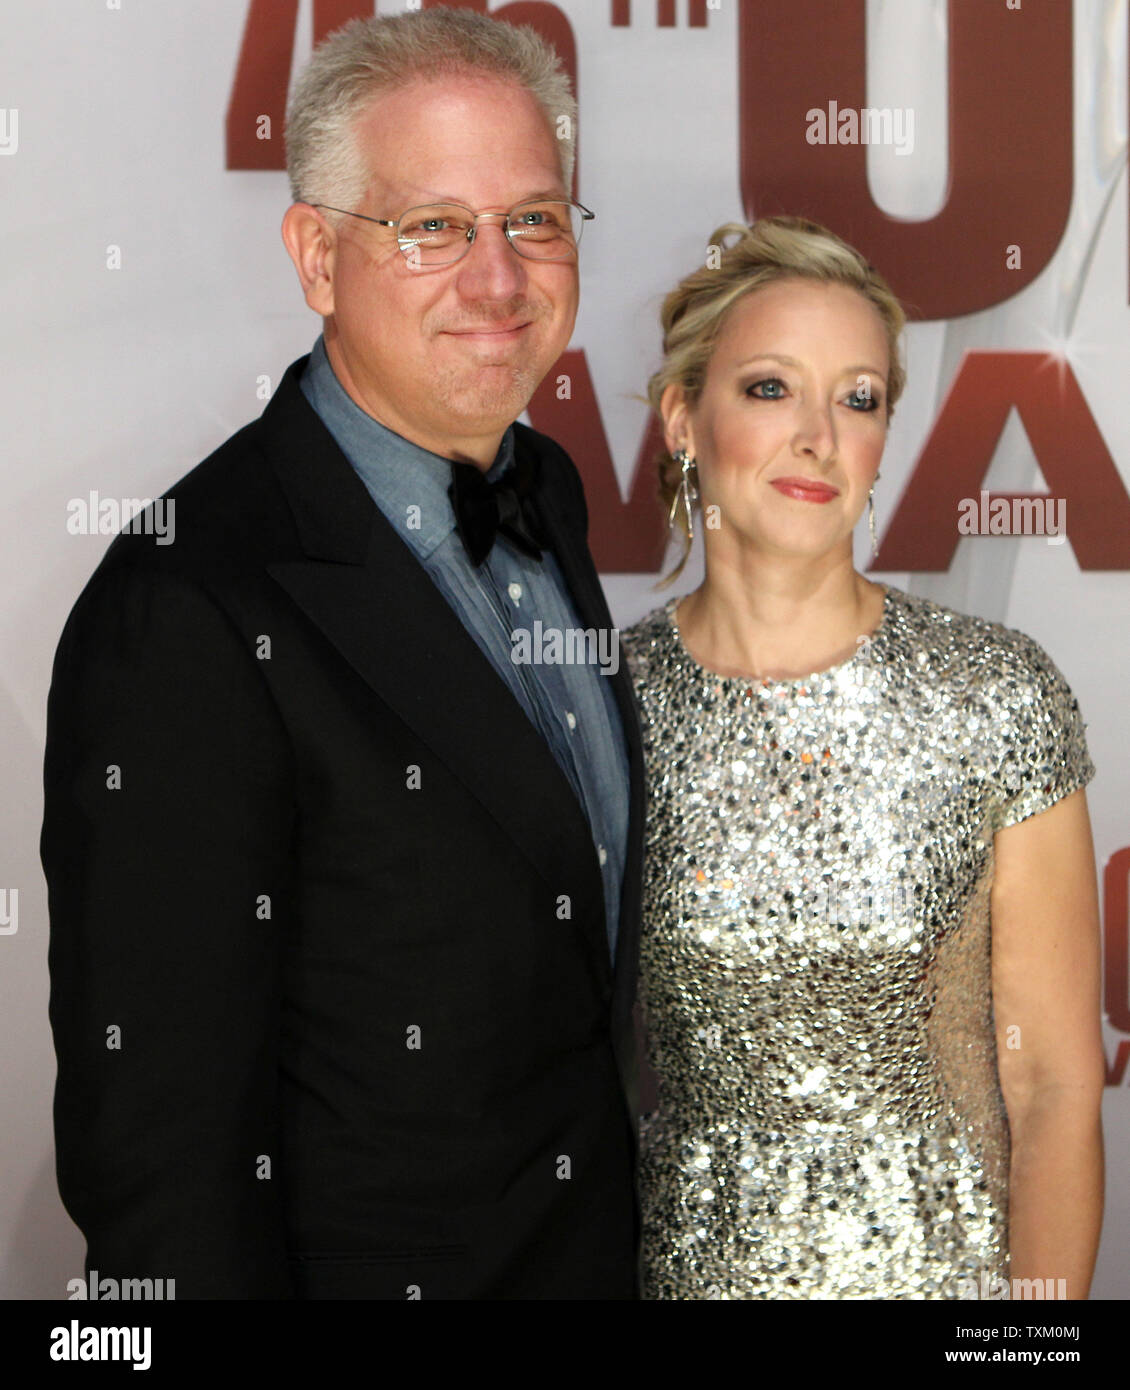 Glenn Beck and his wife Tania arrive on the red carpet at the 45th Annual Country Music Association Awards at the Bridgestone Arena in Nashville, Tennessee on November 9, 2011.  UPI/Terry Wyatt Stock Photo